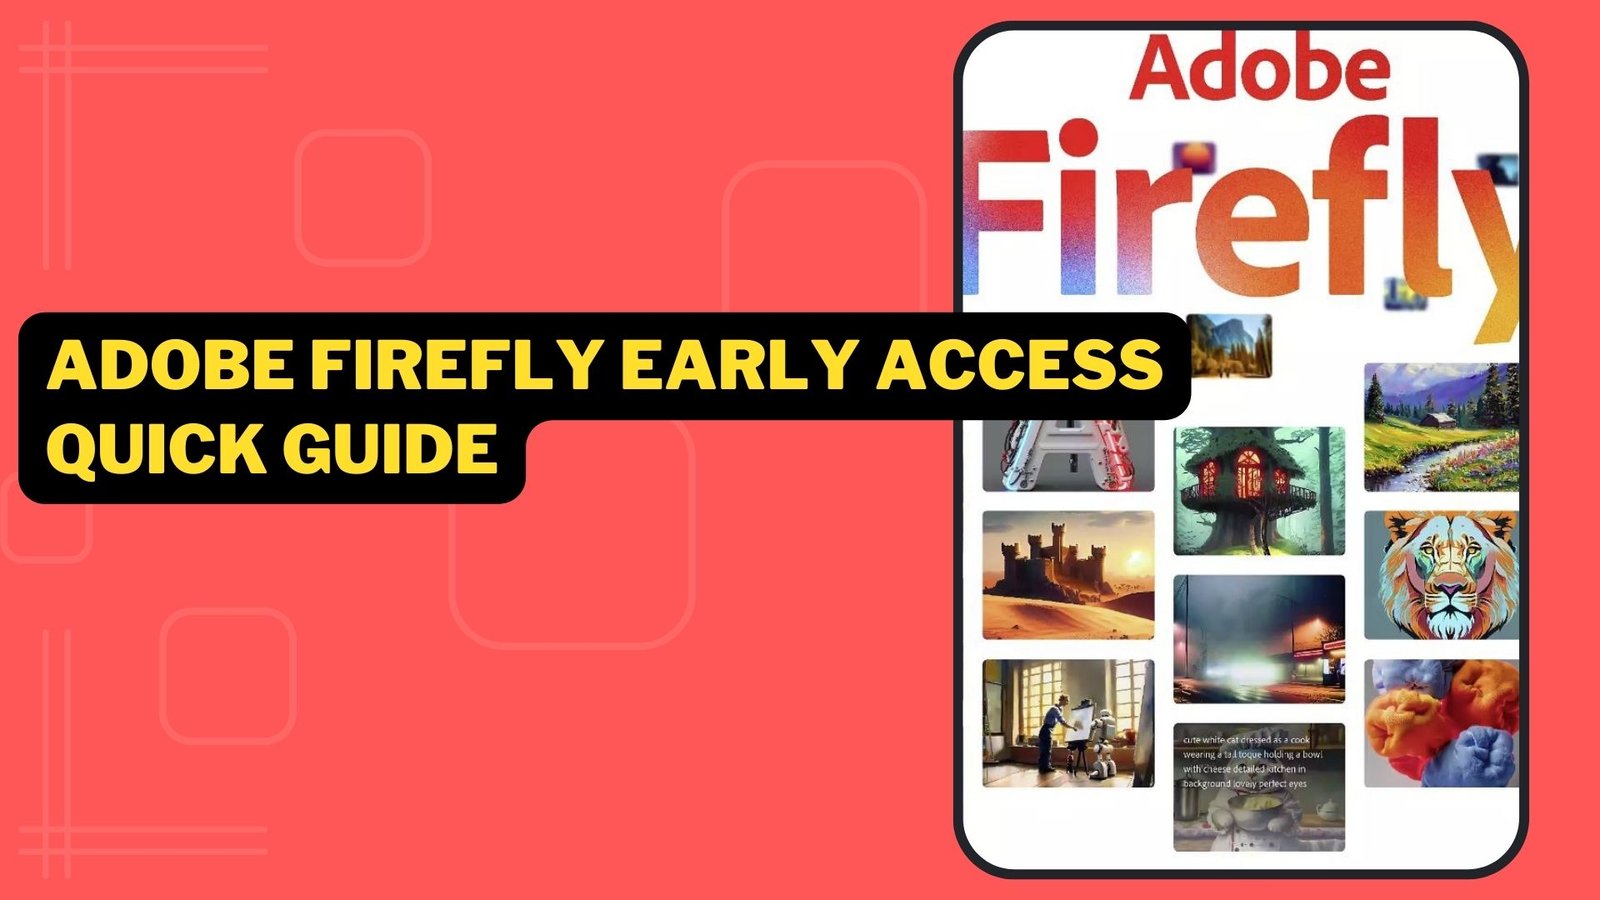 Adobe Firefly Early Access Quick Guide